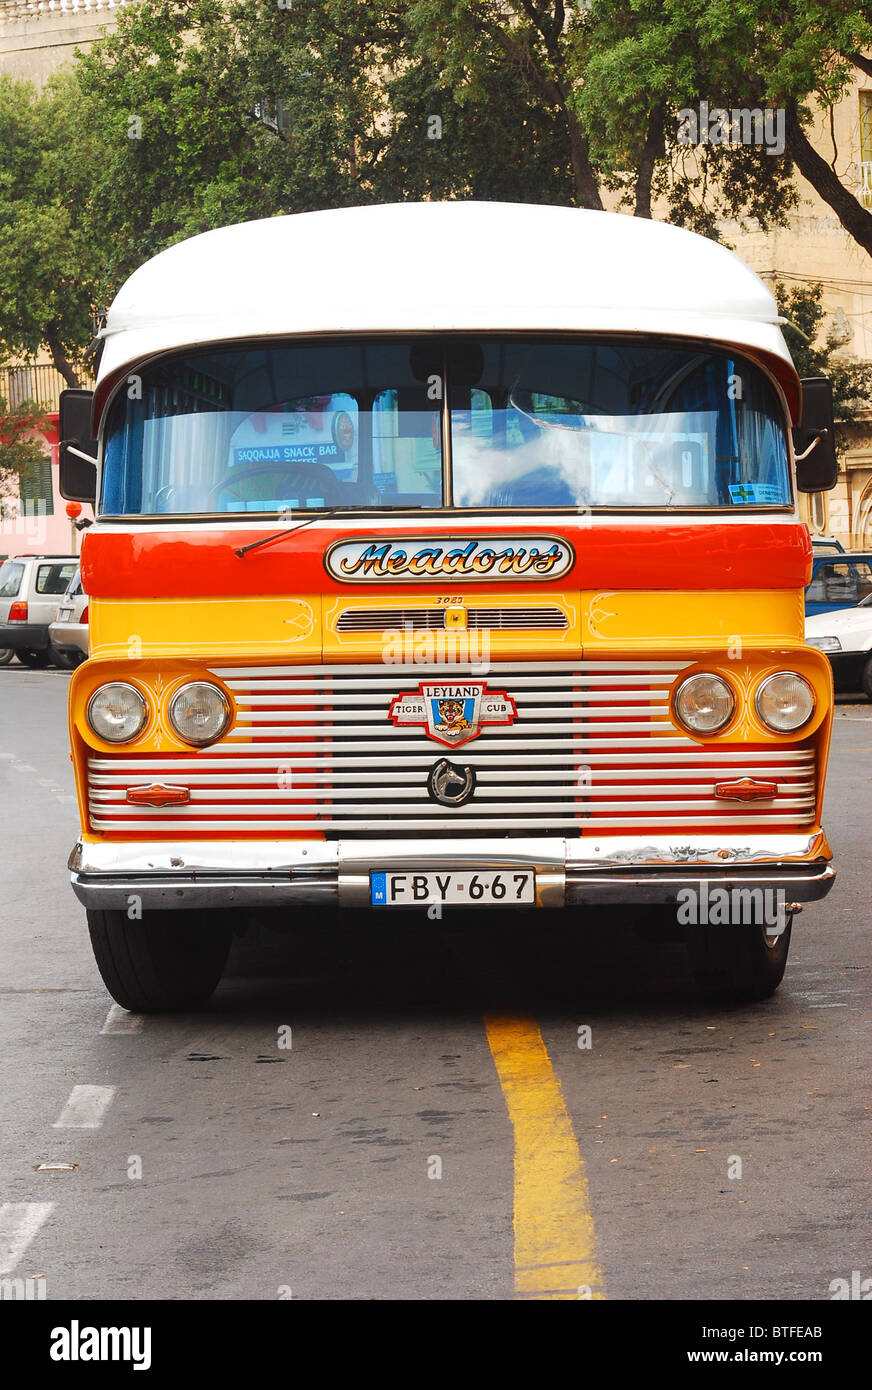 Old Malta Bus on the bus stop Stock Photo